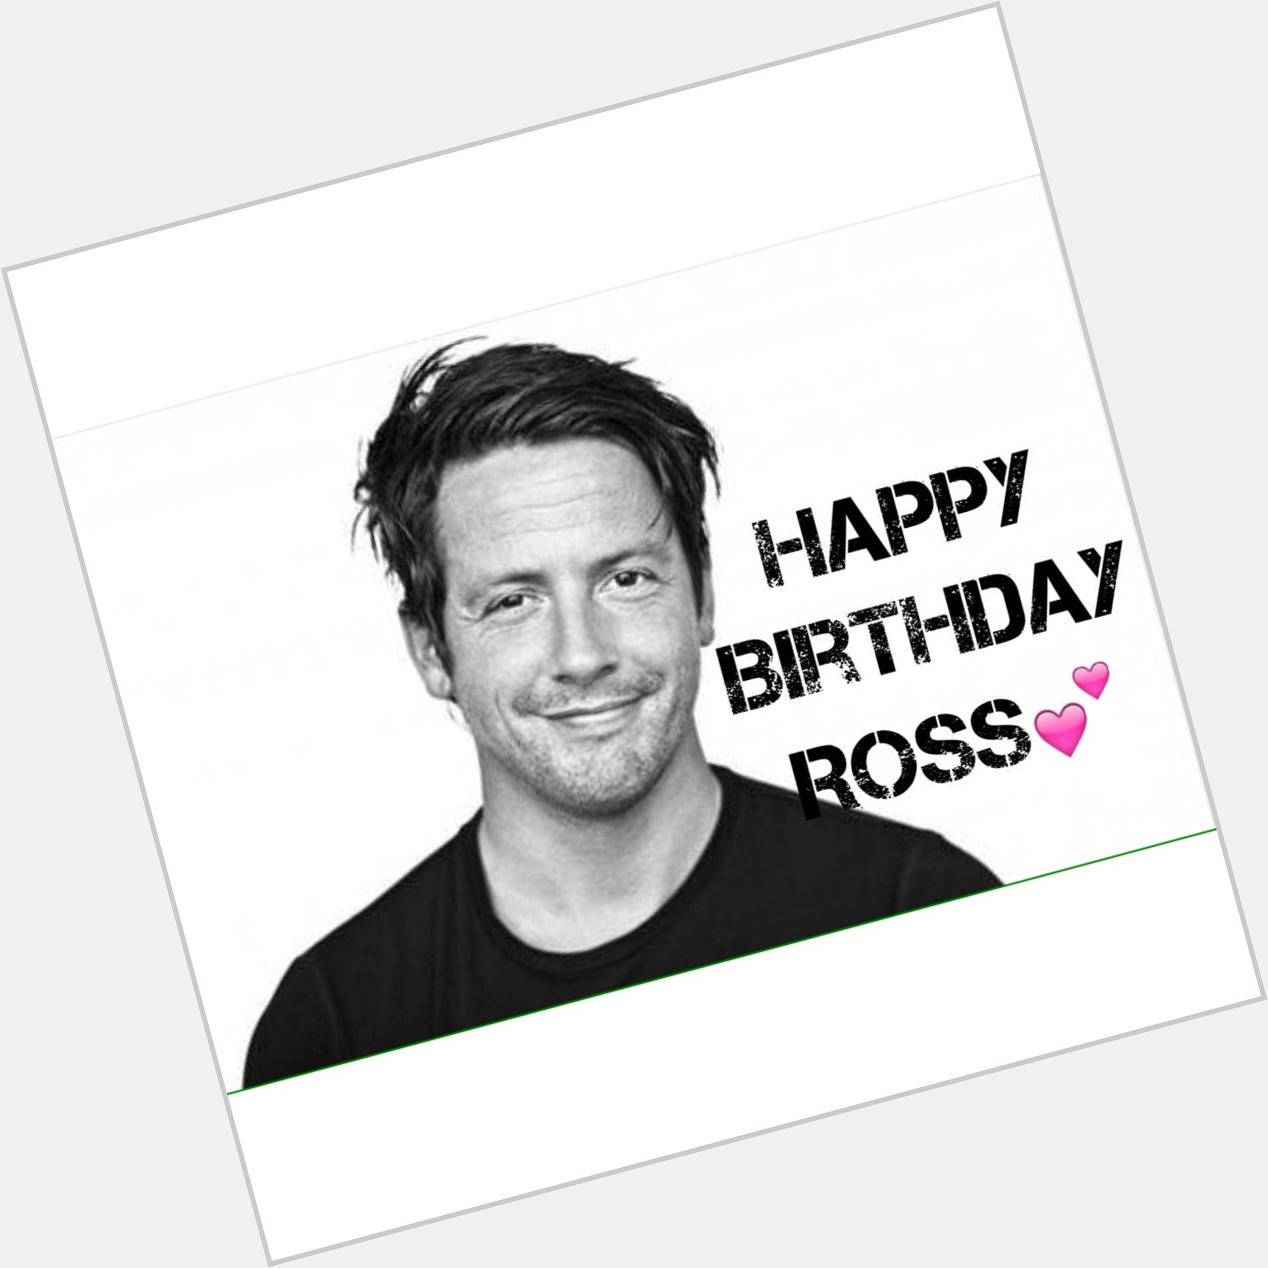 Happy Birthday to the amazing and talented Ross McCall!  